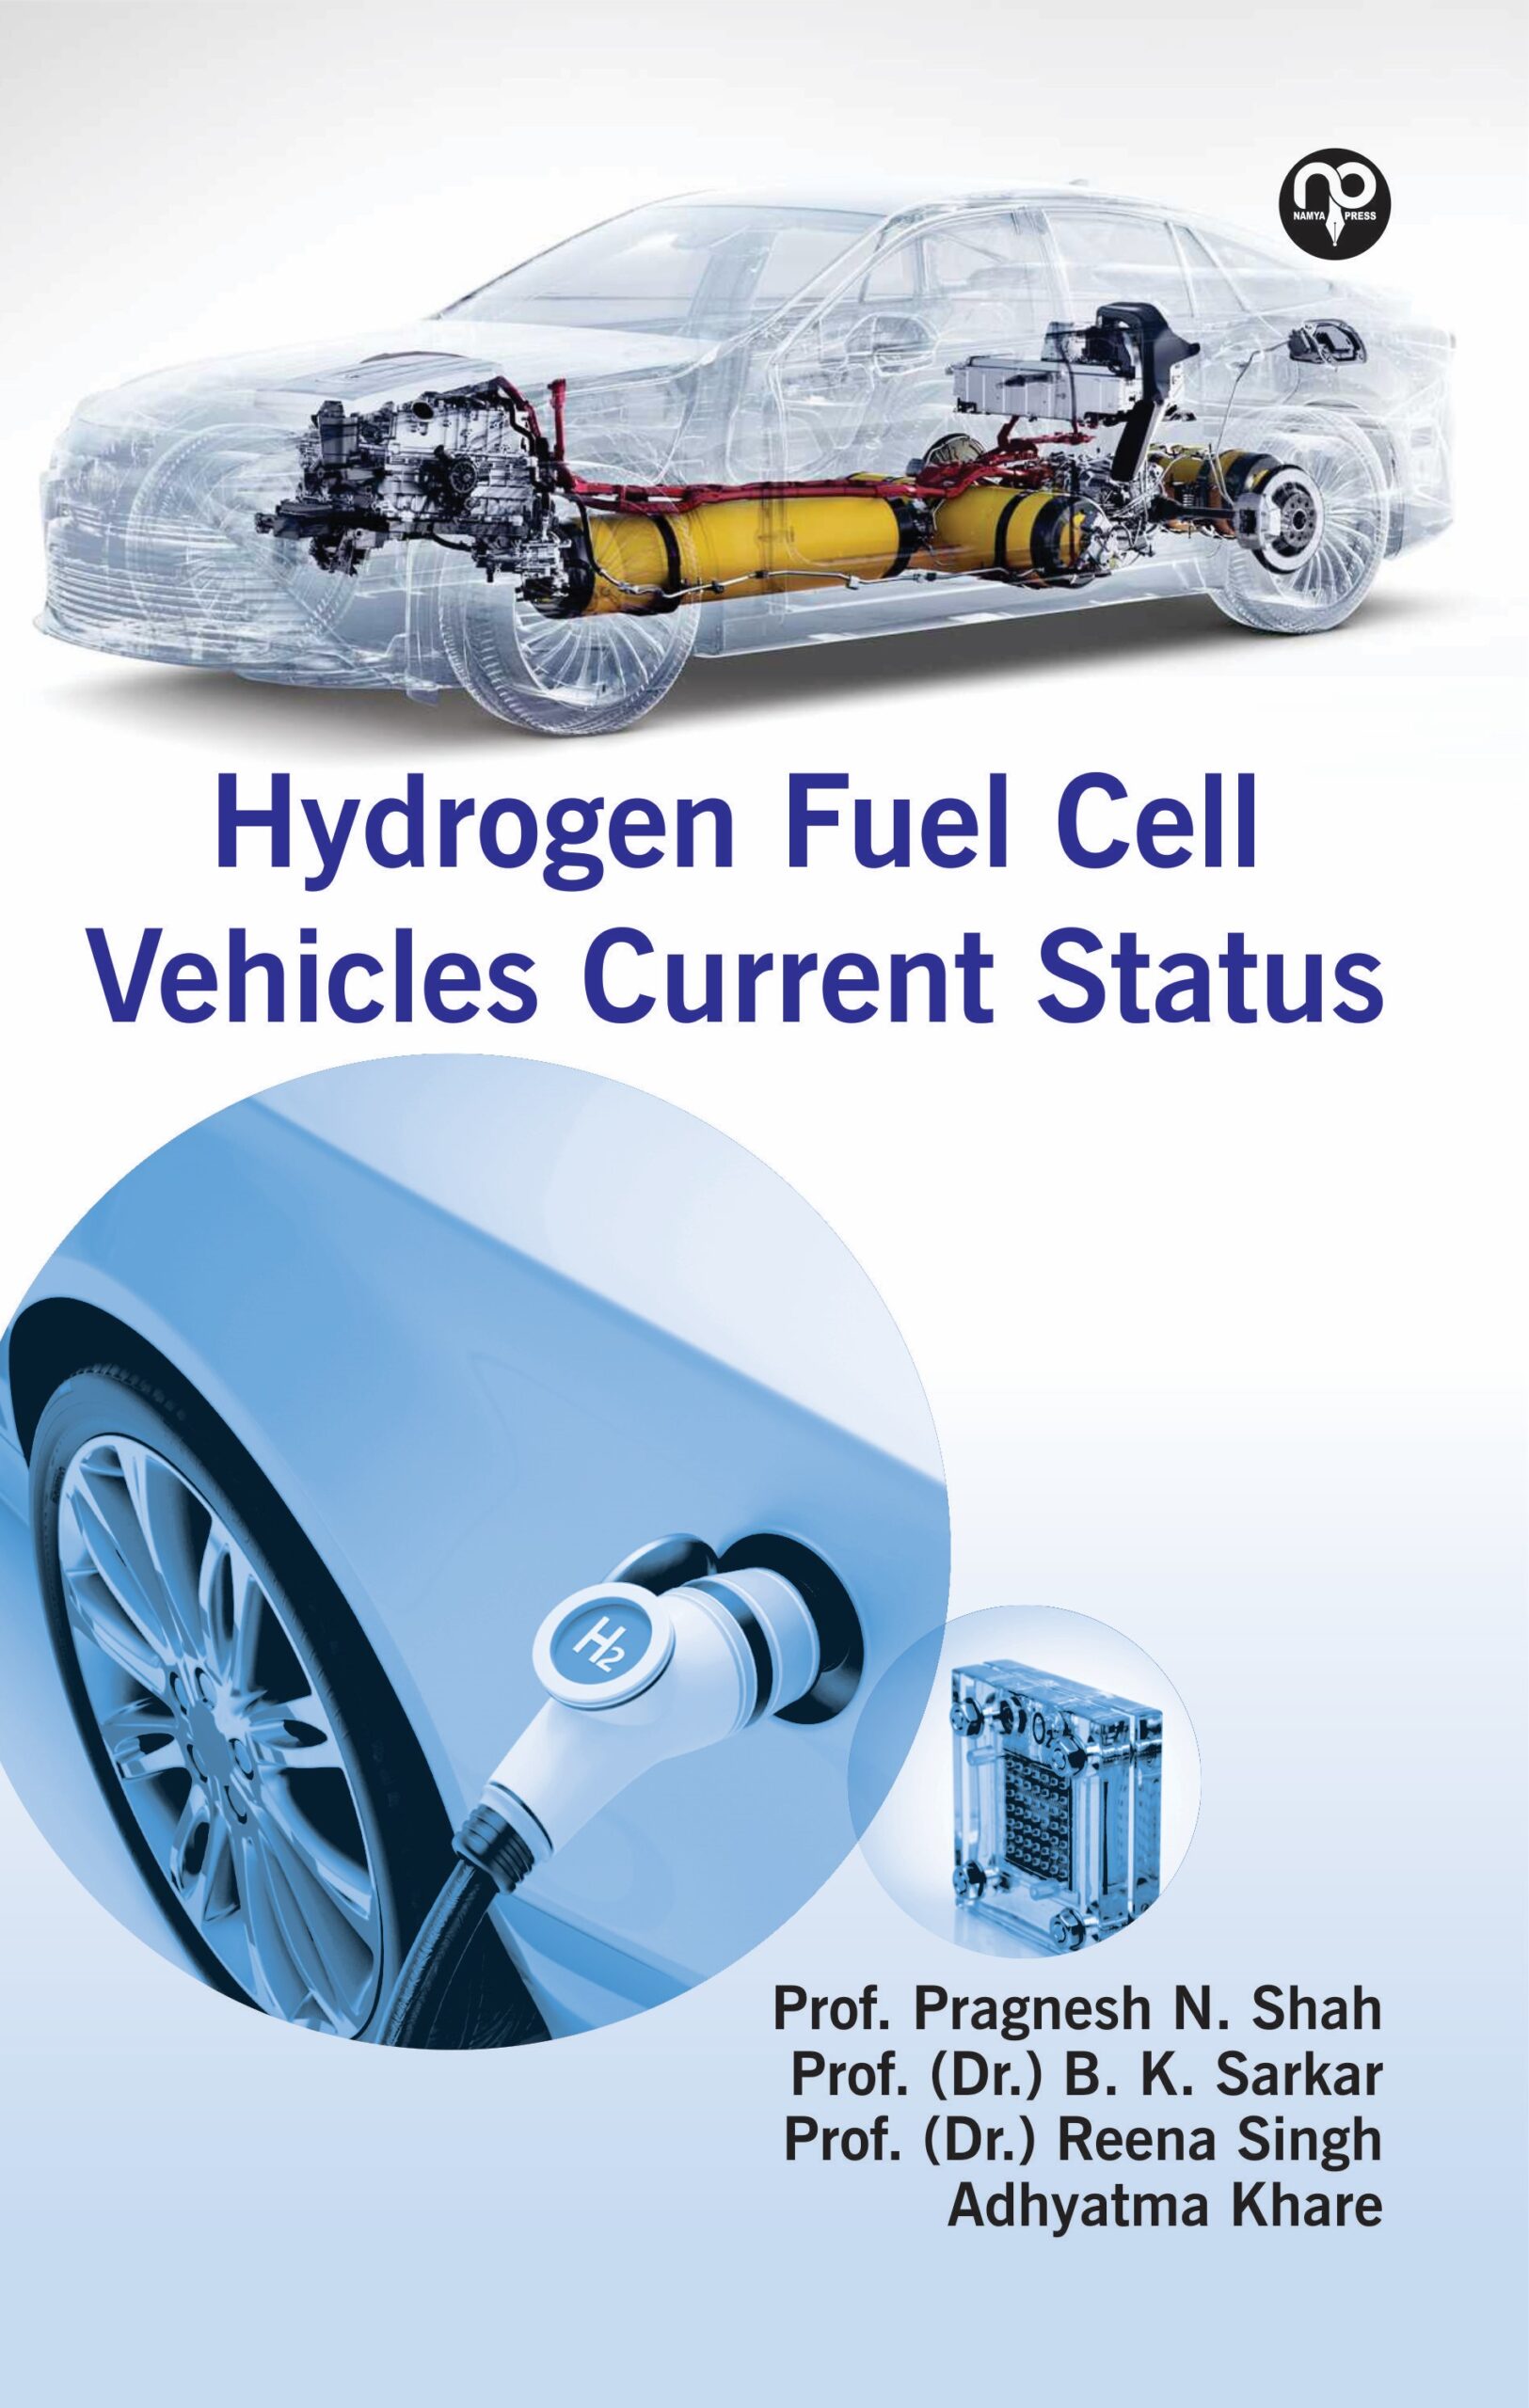 Hydrogen Fuel Cell Vehicles Current Status